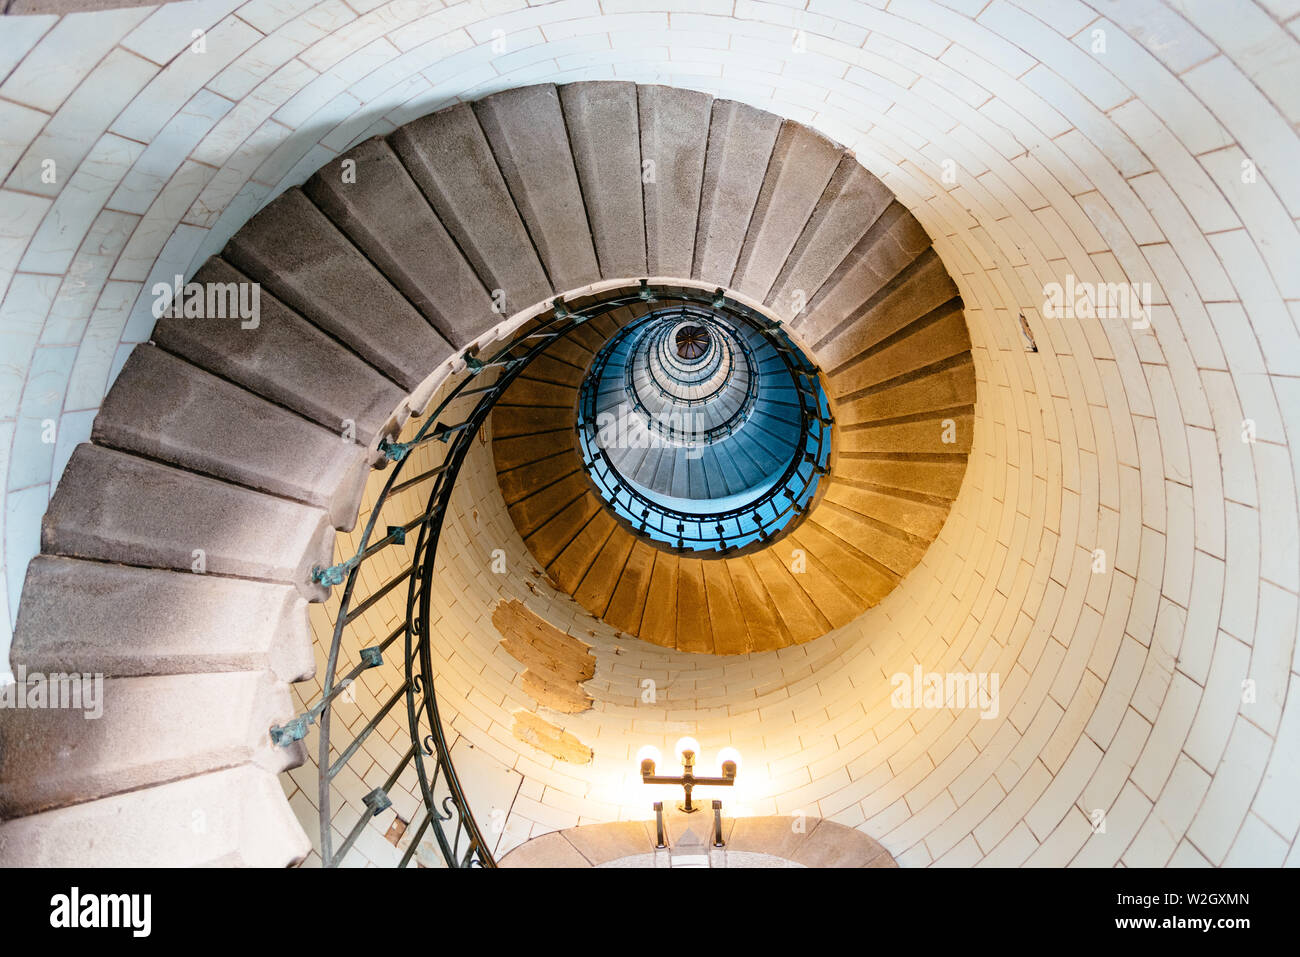 Penmarch, France - August 2, 2018: Spiral staircase in Eckmuhl Lighthouse in Brittany. Directly below view Stock Photo